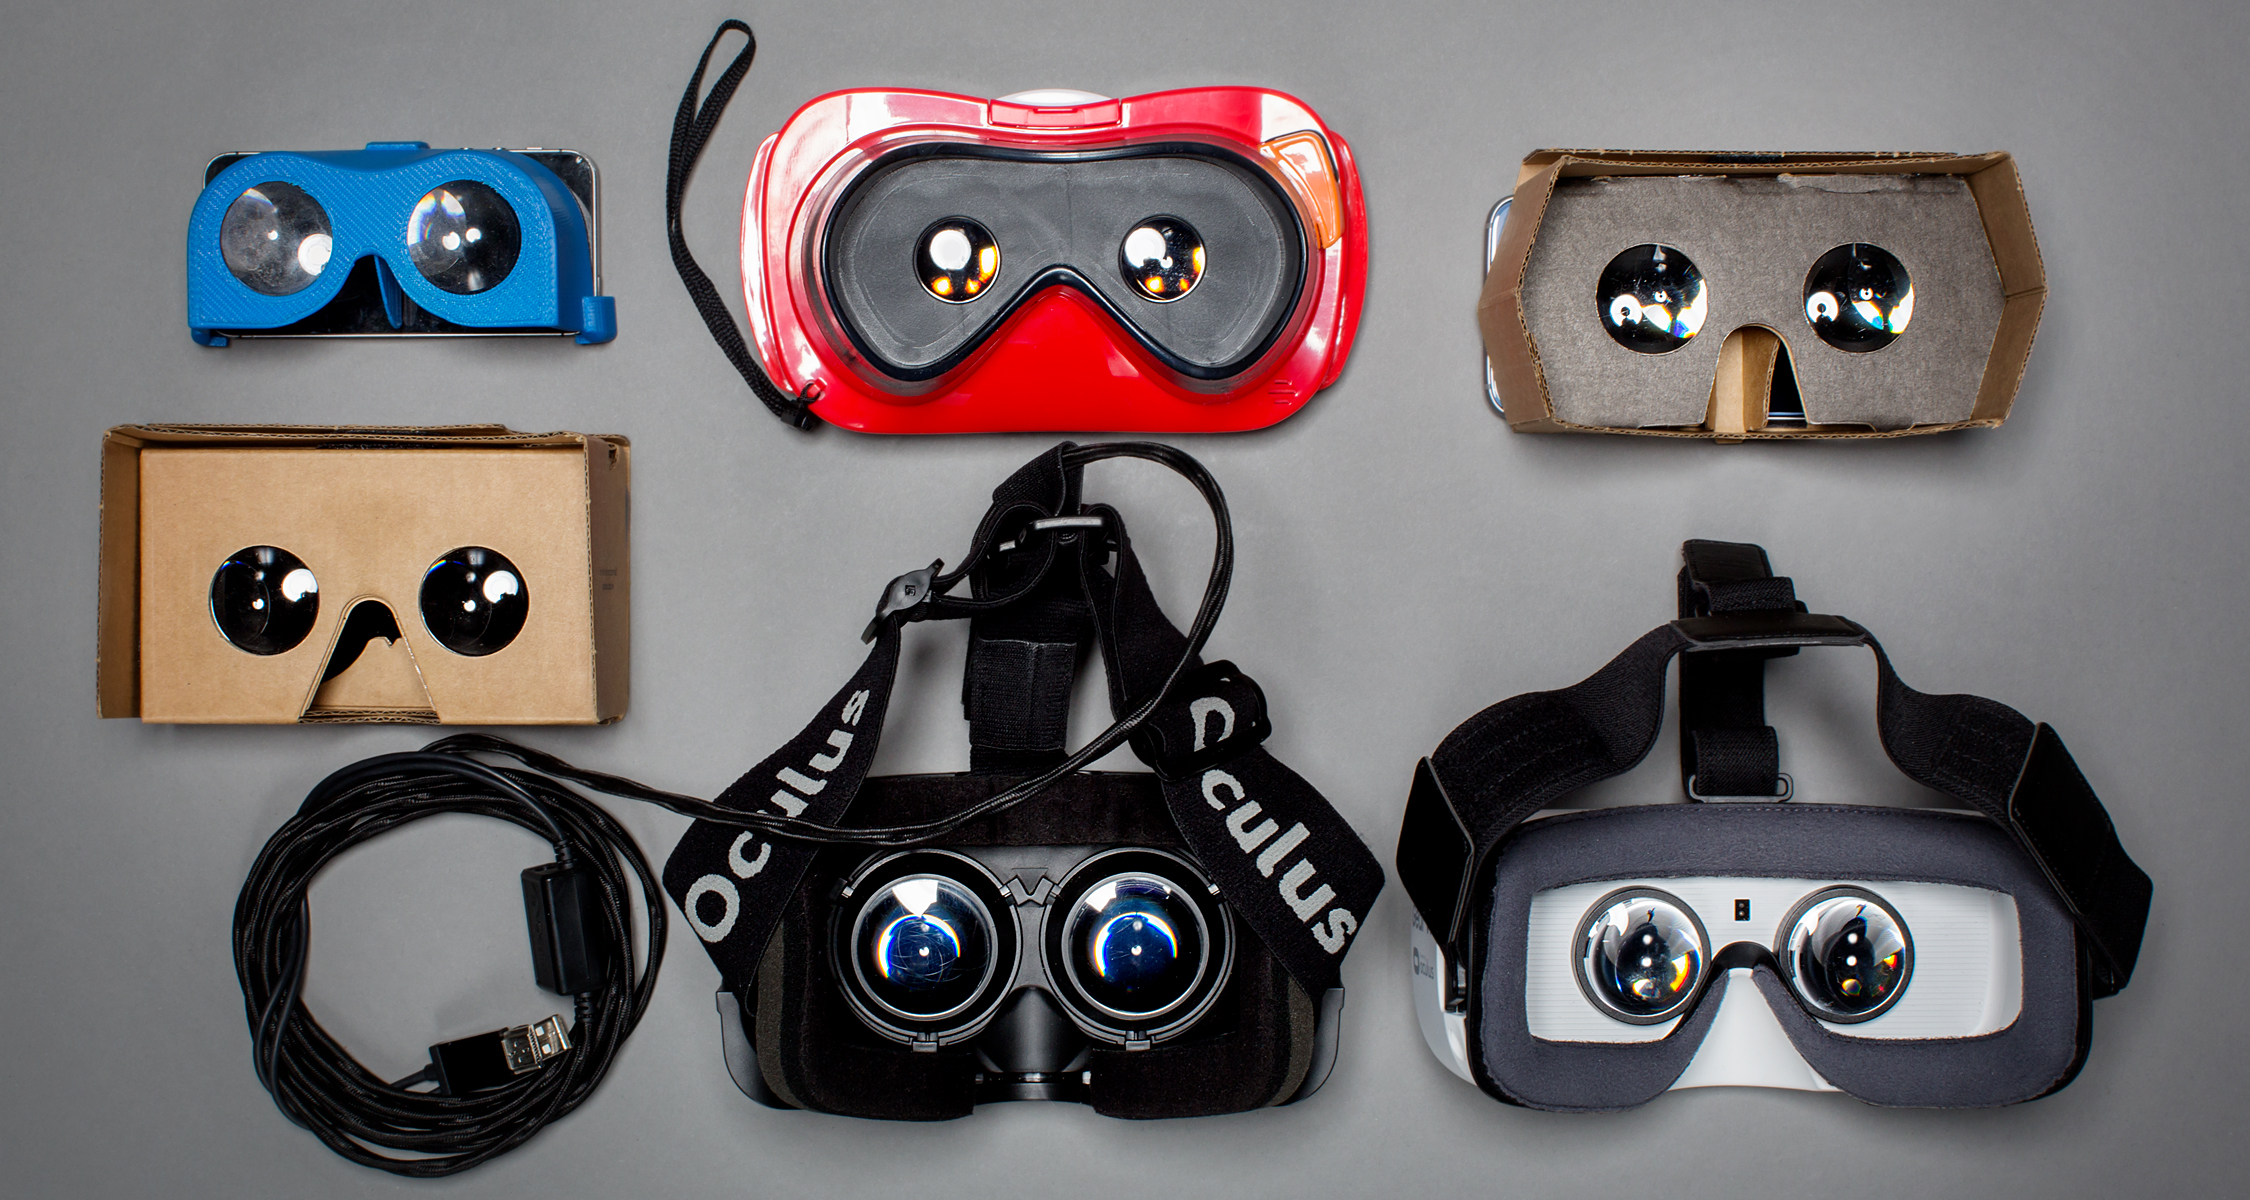 Classification Evil Dirty The ultimate VR headset buyer's guide